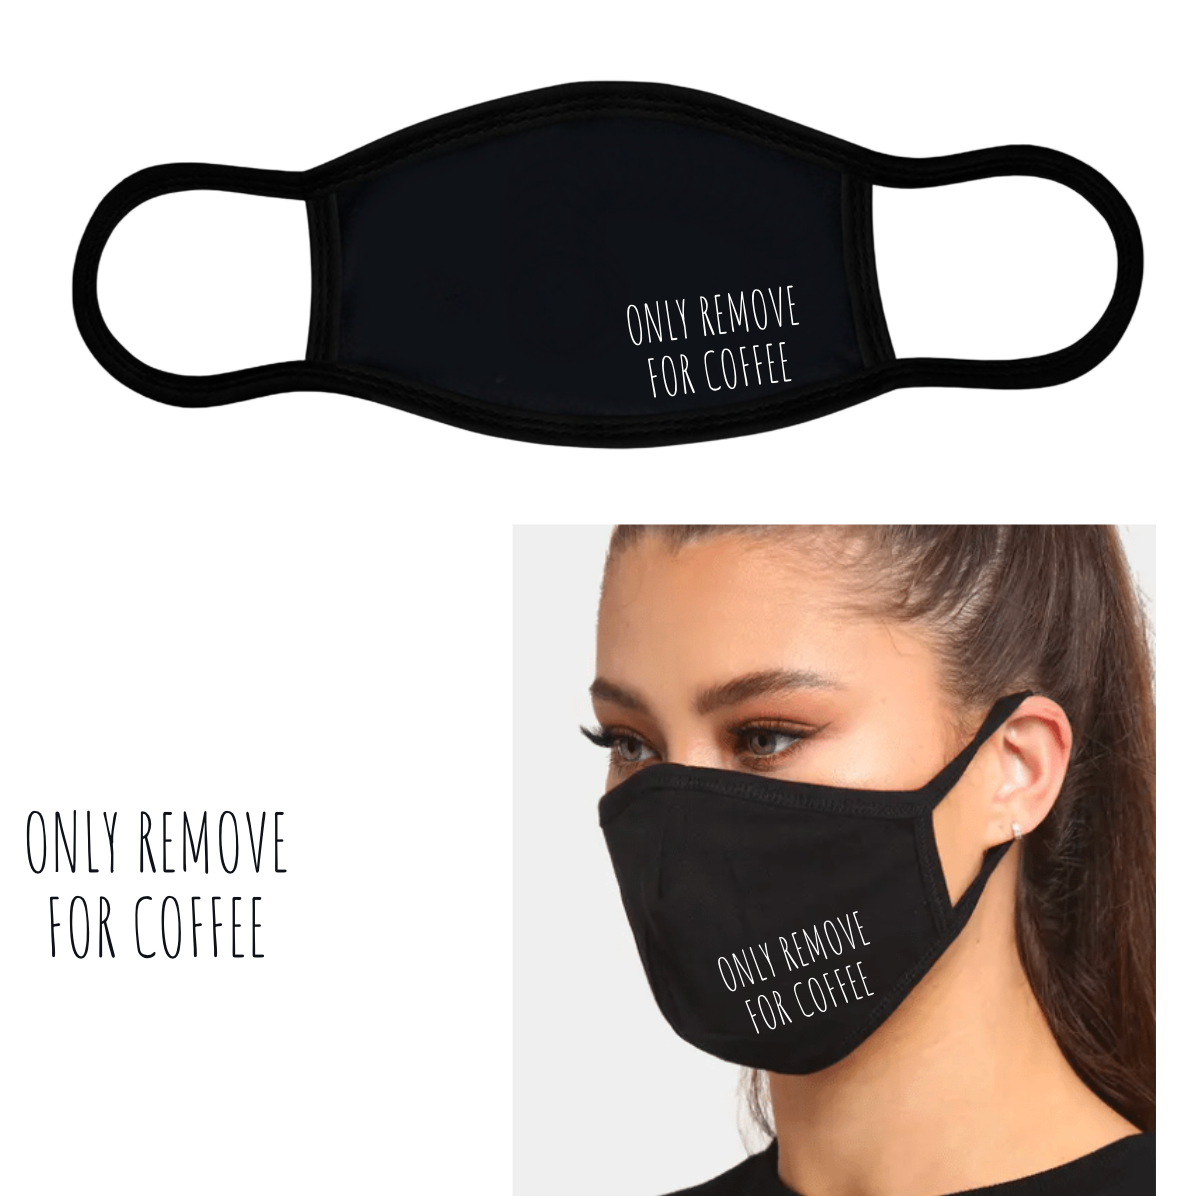 ONLY REMOVE FOR COFFEE